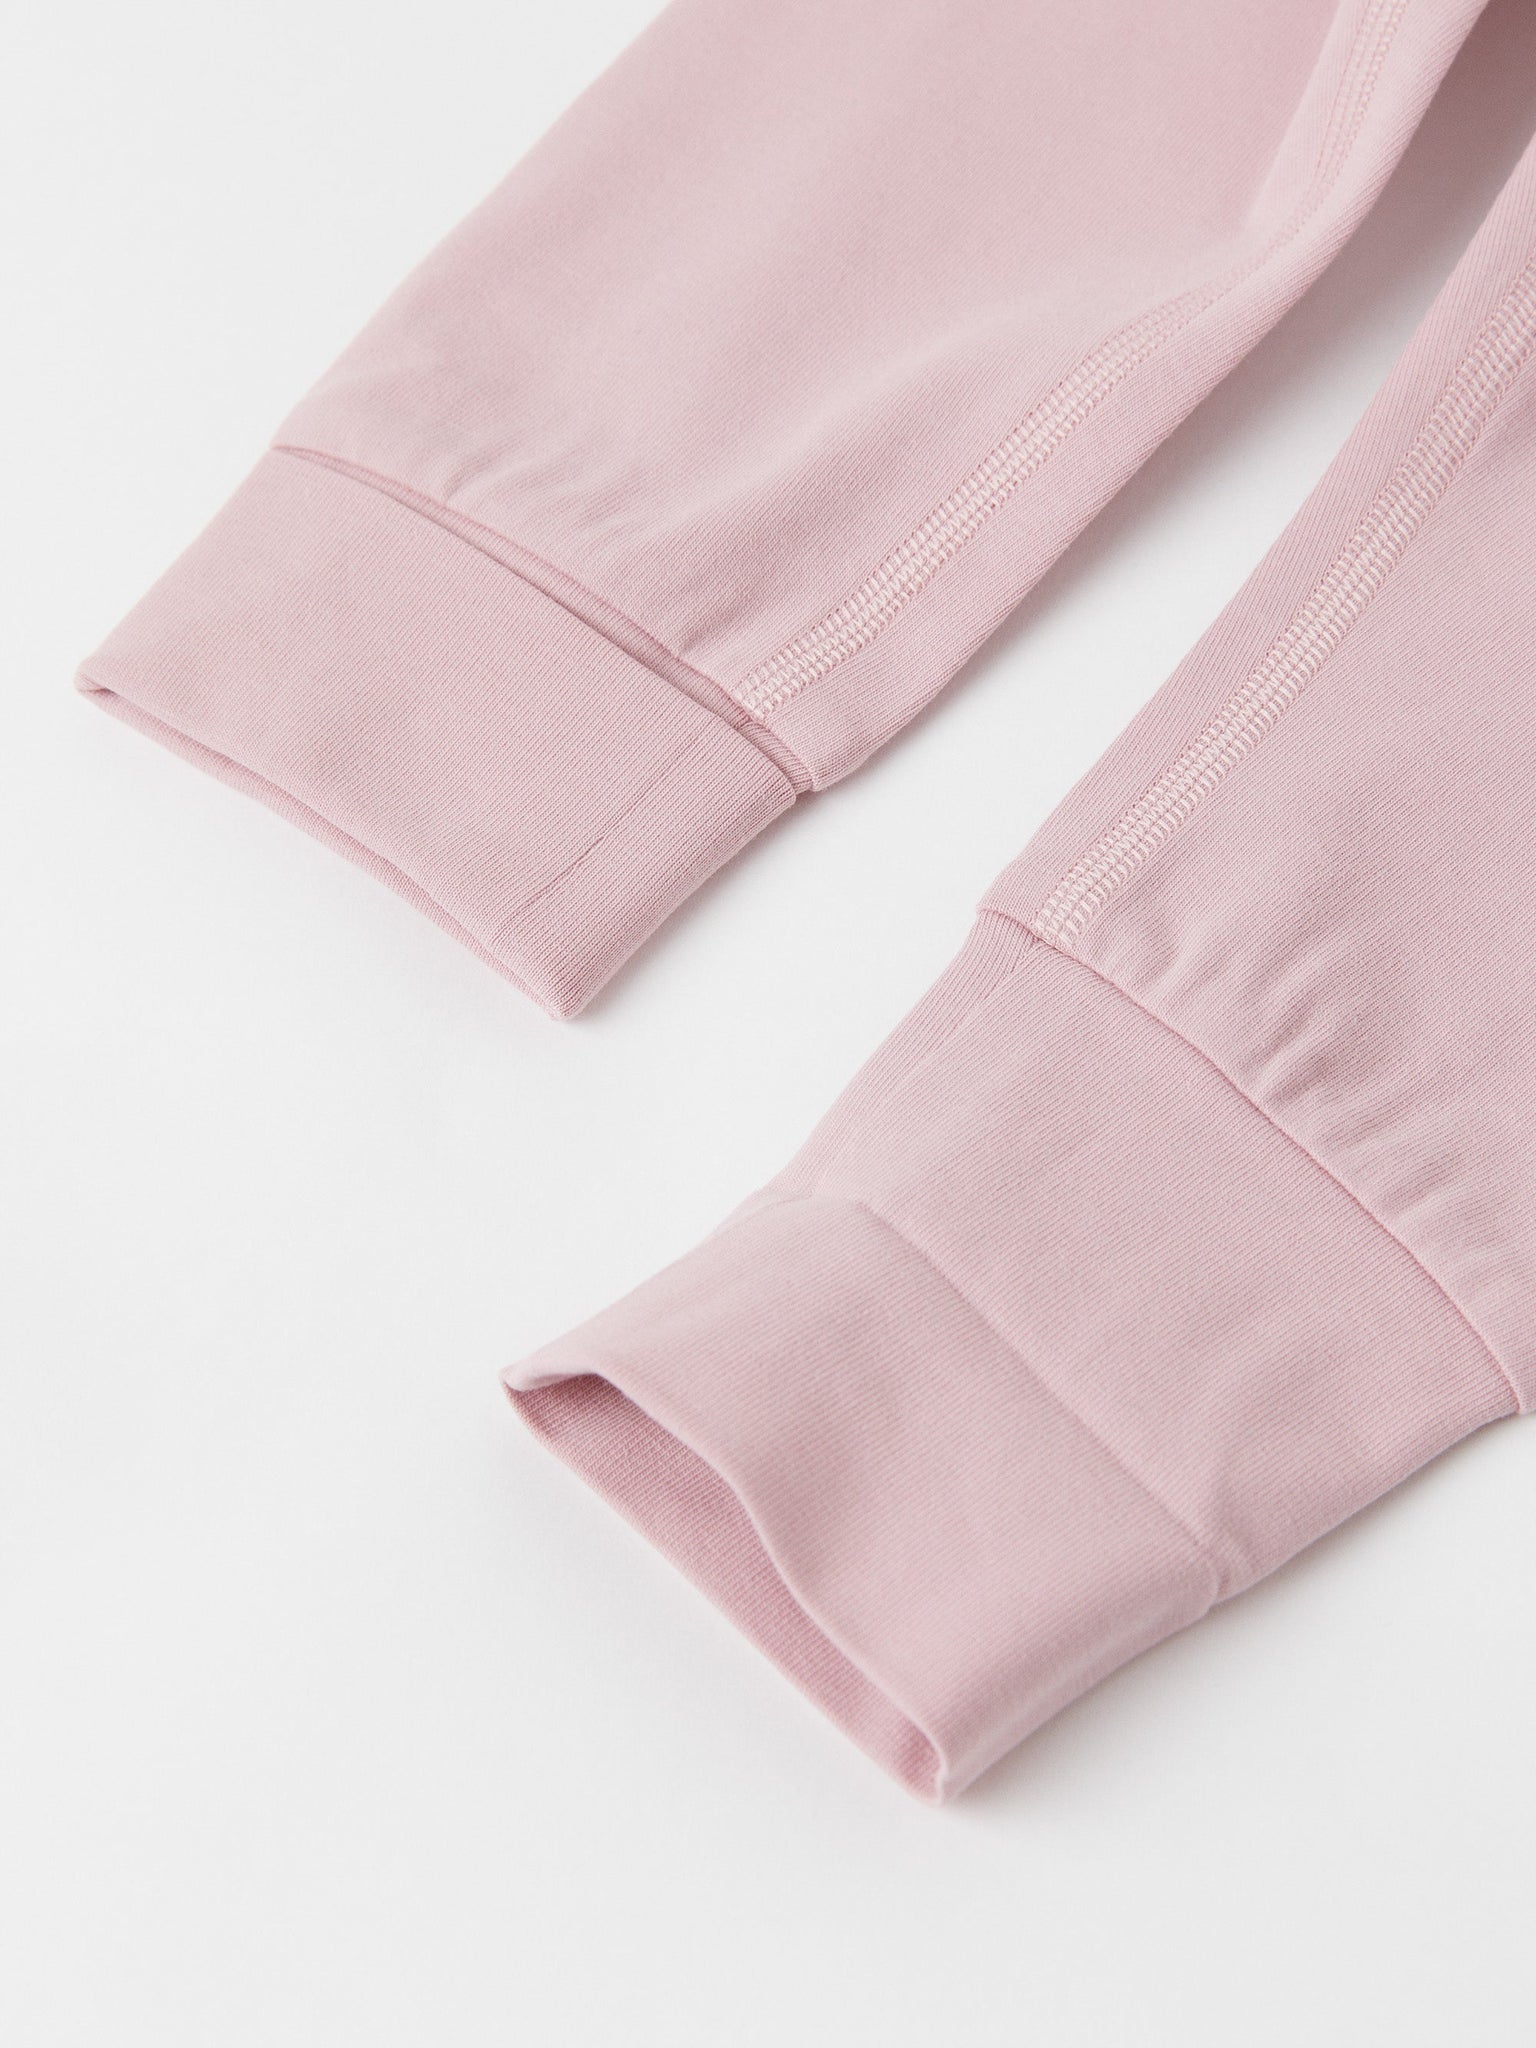 Organic Cotton Pink Baby Leggings from the Polarn O. Pyret baby collection. Ethically produced baby clothing.